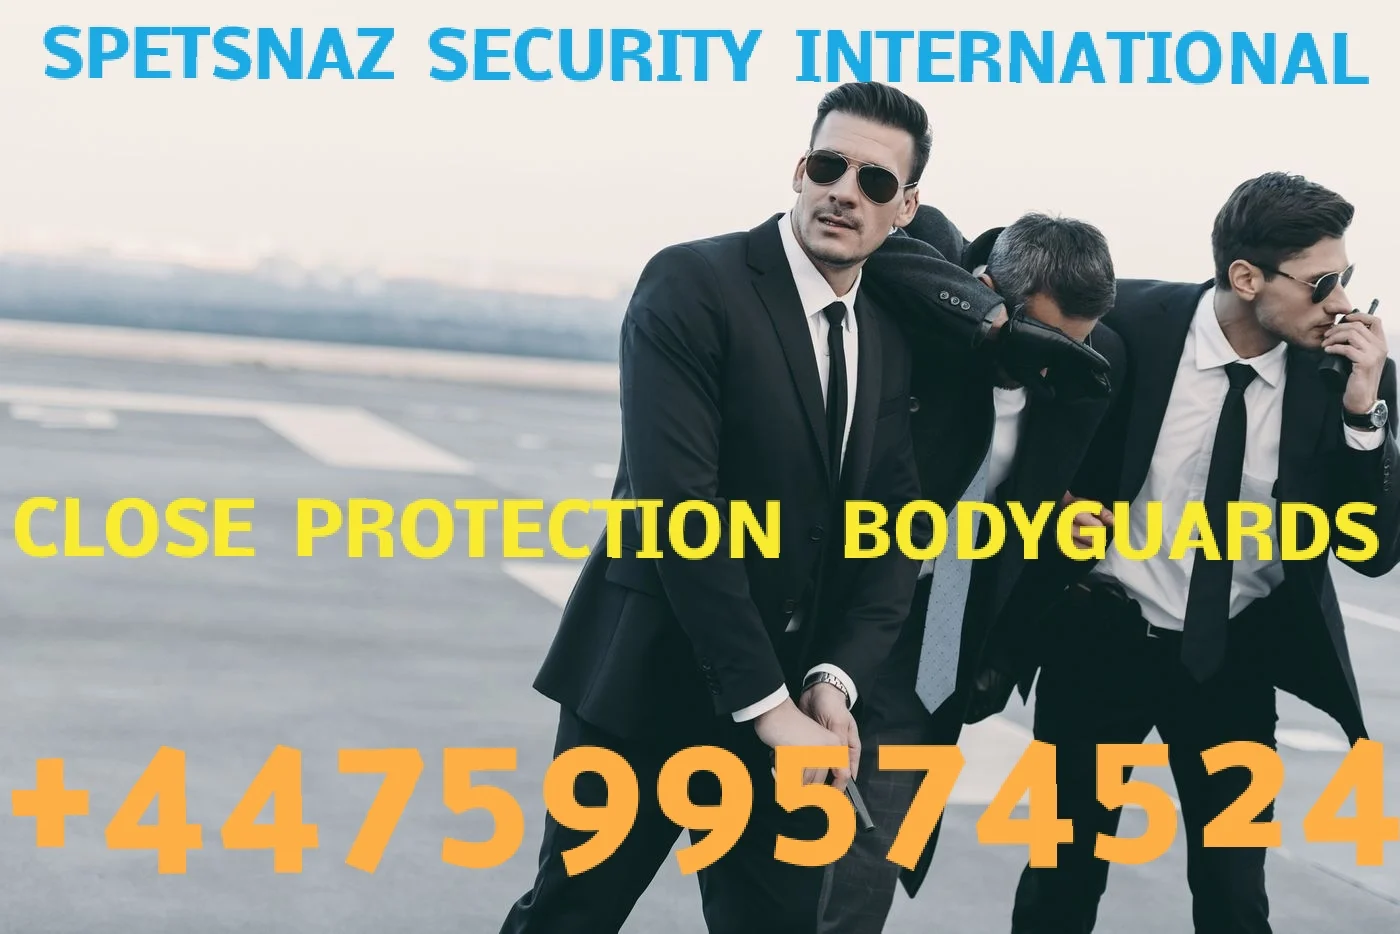 Armed Close Protection Services-Executive bodyguard-Executive Close Protection. With its close protection teams, Spetsnaz Security International Fidel Matola can work with its clients to protect their businesses most valuable assets – their personnel, families, and their properties at all points in potential risk situations.-